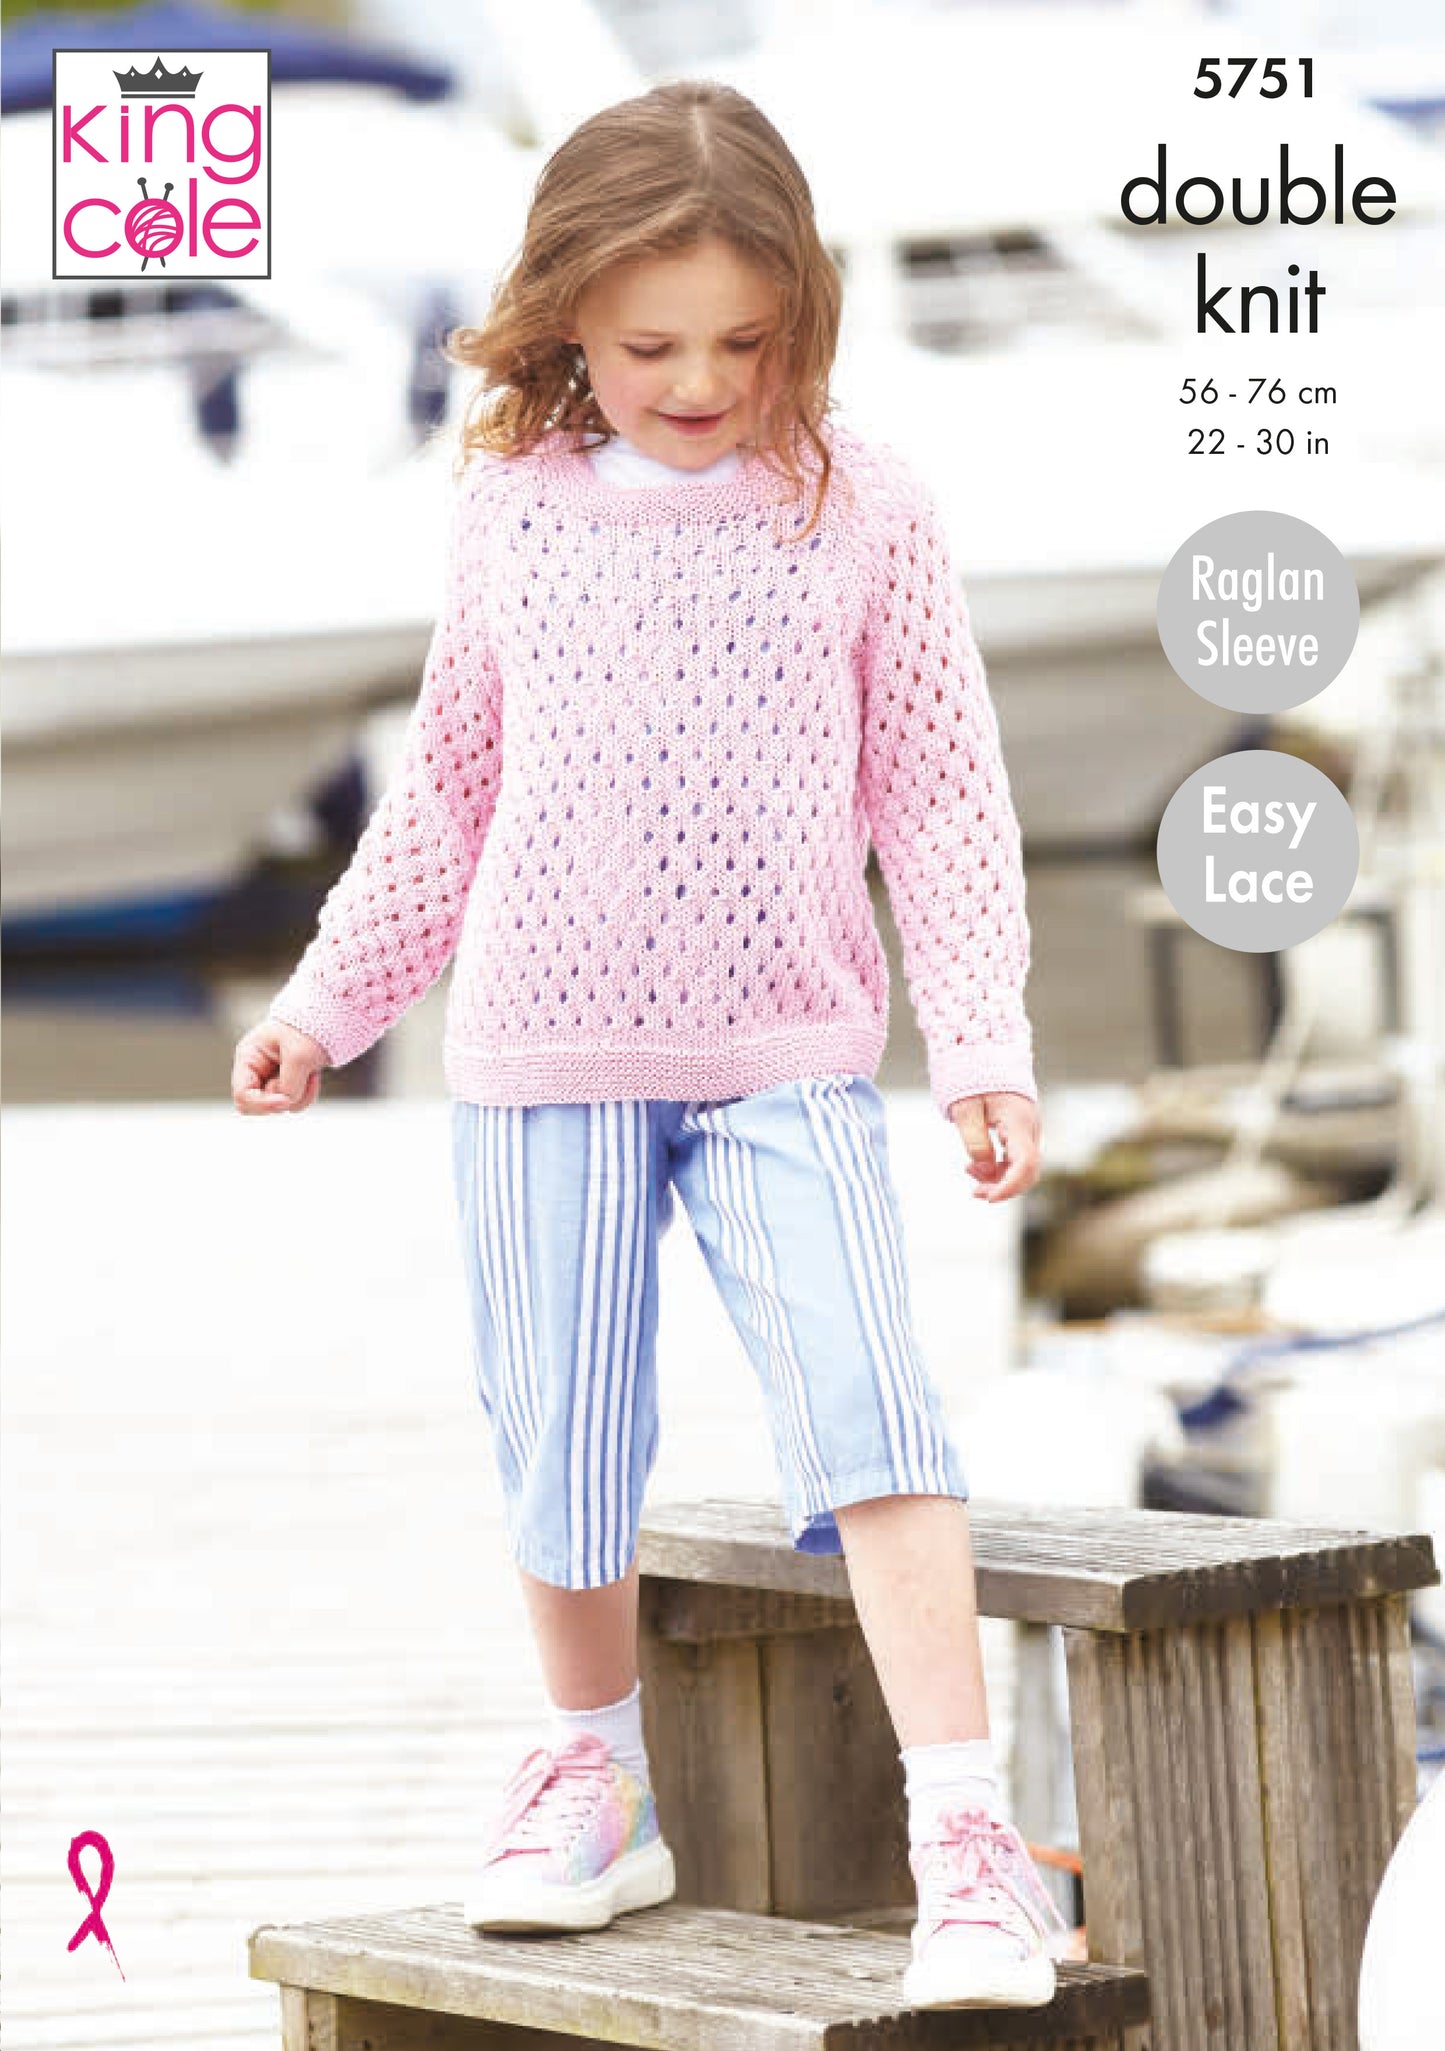 King Cole Cottonsmooth DK Pattern - 5751 Girls' Sweater and Cardigan